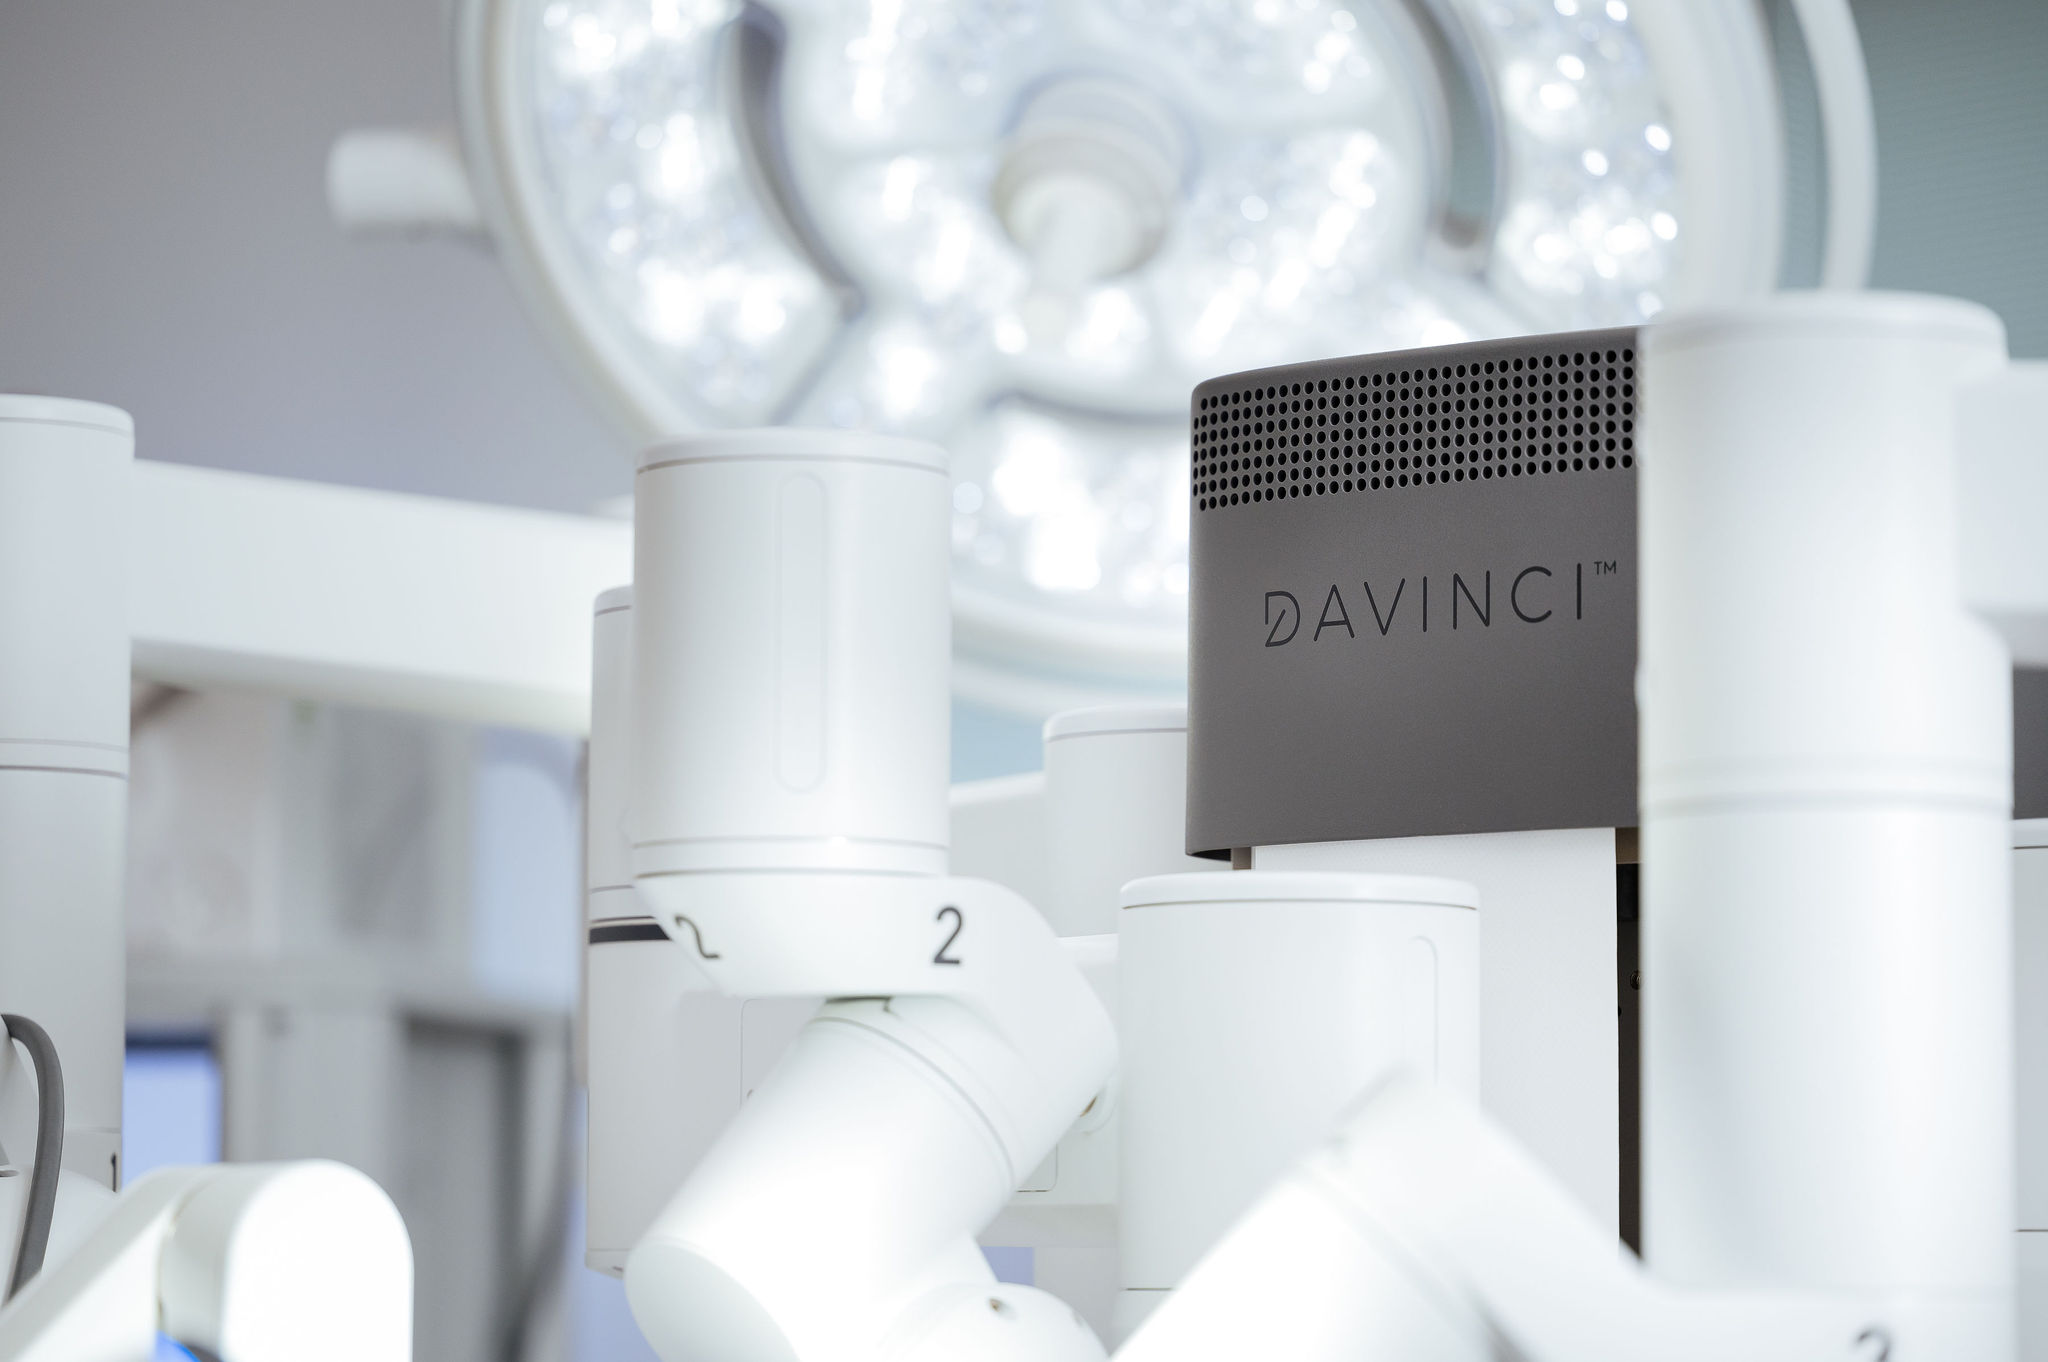 robotic surgery in nashville is made possible by the davinci surgical robot device.